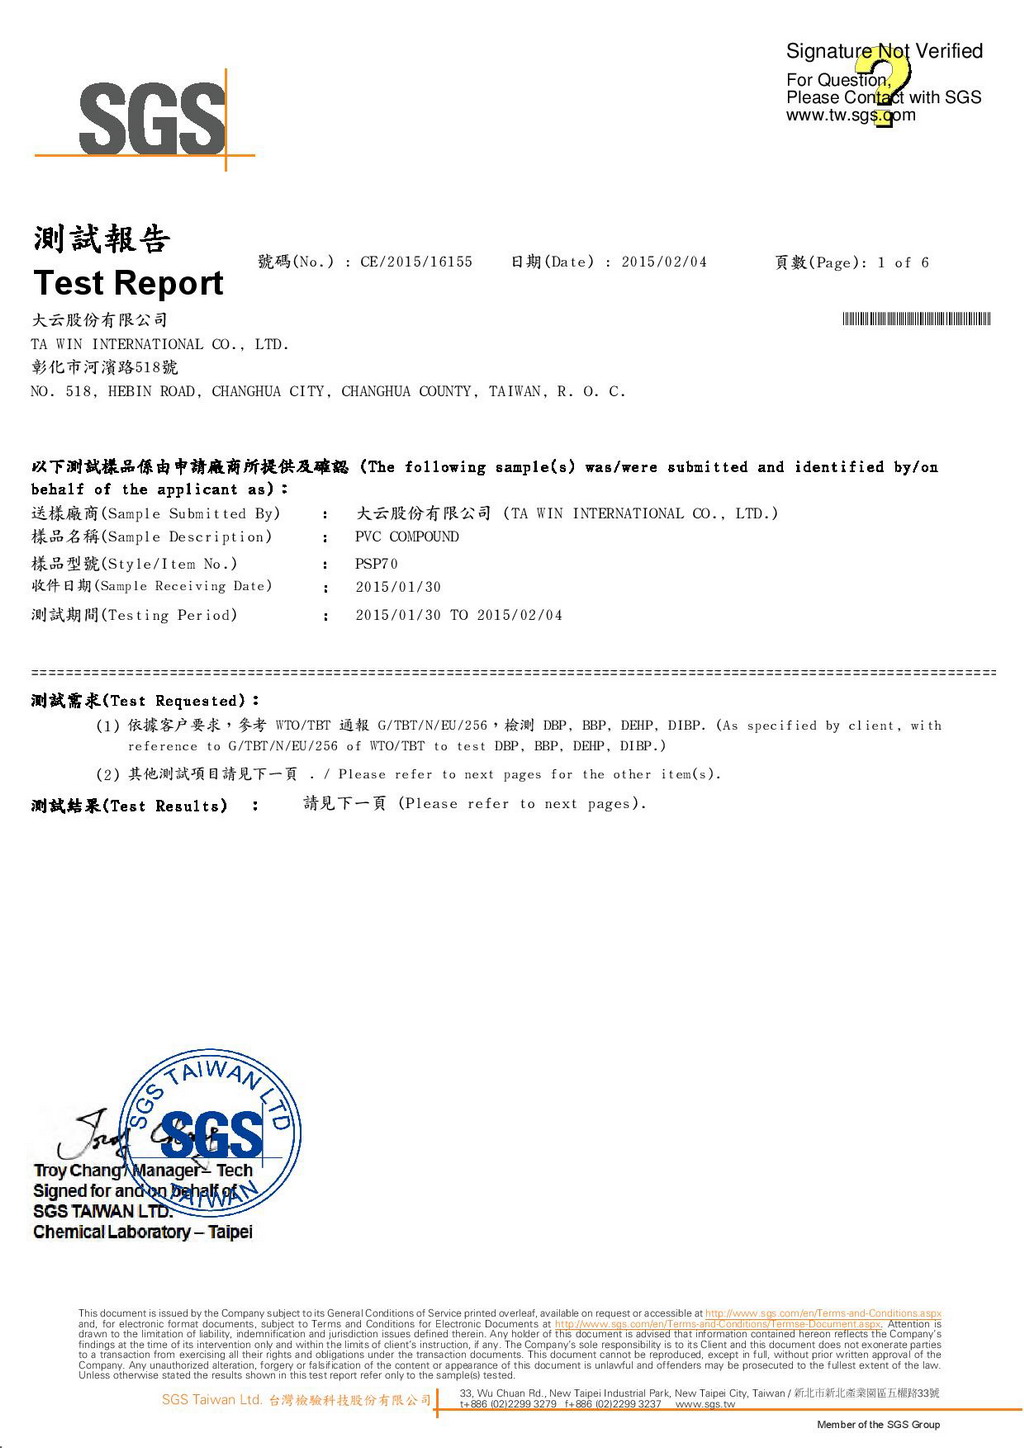 2015.02-The new version of SGS Testing Report for PVC Compound was enclosed.  